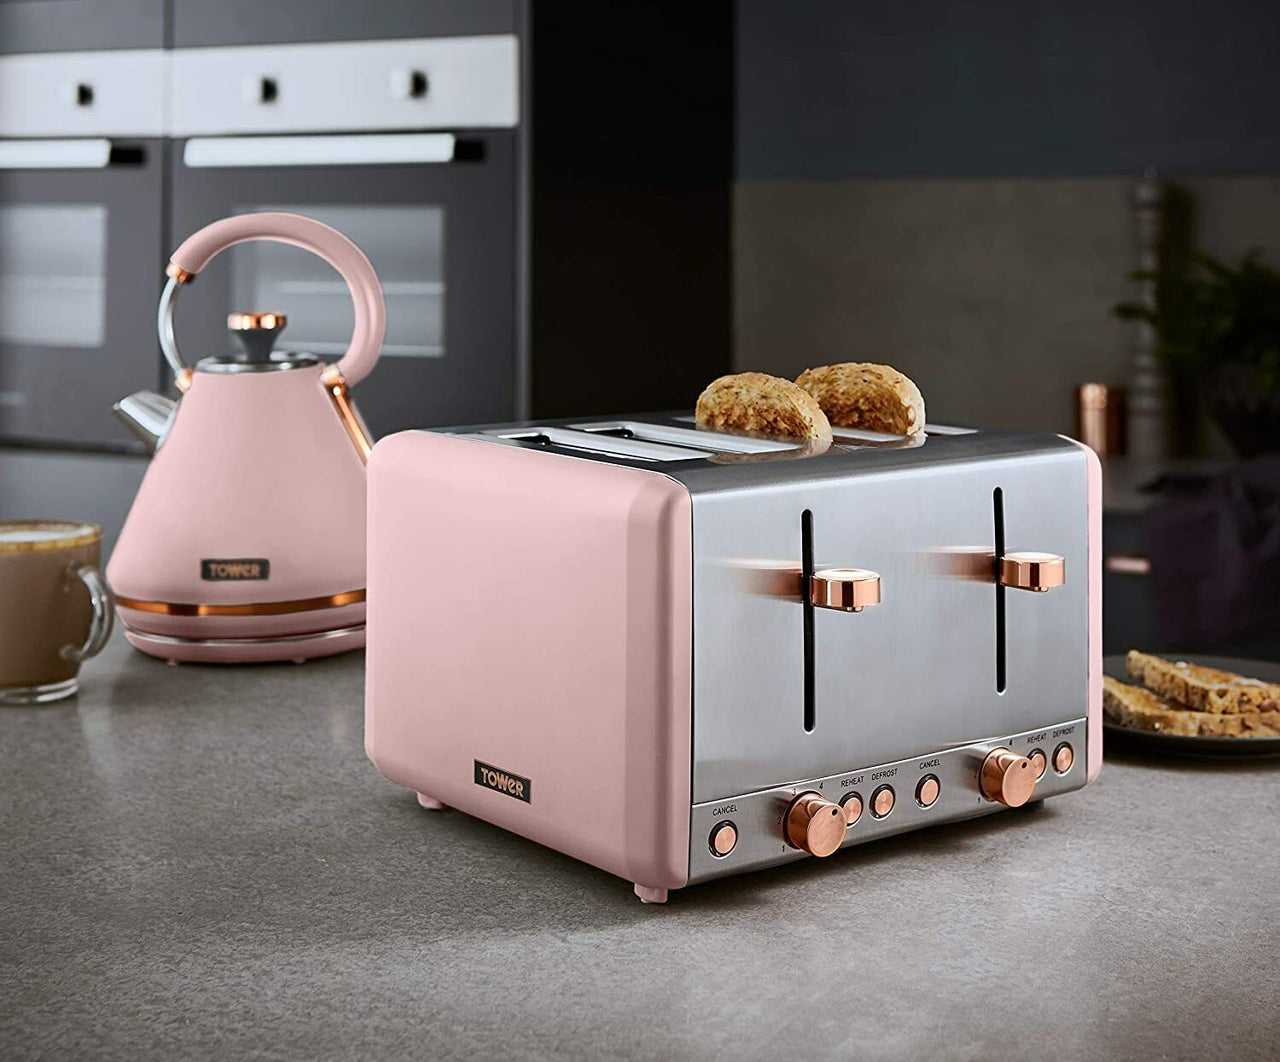 TOWER Cavaletto Pink & Rose Gold 3KW 1.7L Pyramid Kettle, 4 Slice 1800W Toaster & Set of 3 Tea, Coffee, Sugar Canisters. Matching Kitchen Set in Pink & Rose Gold